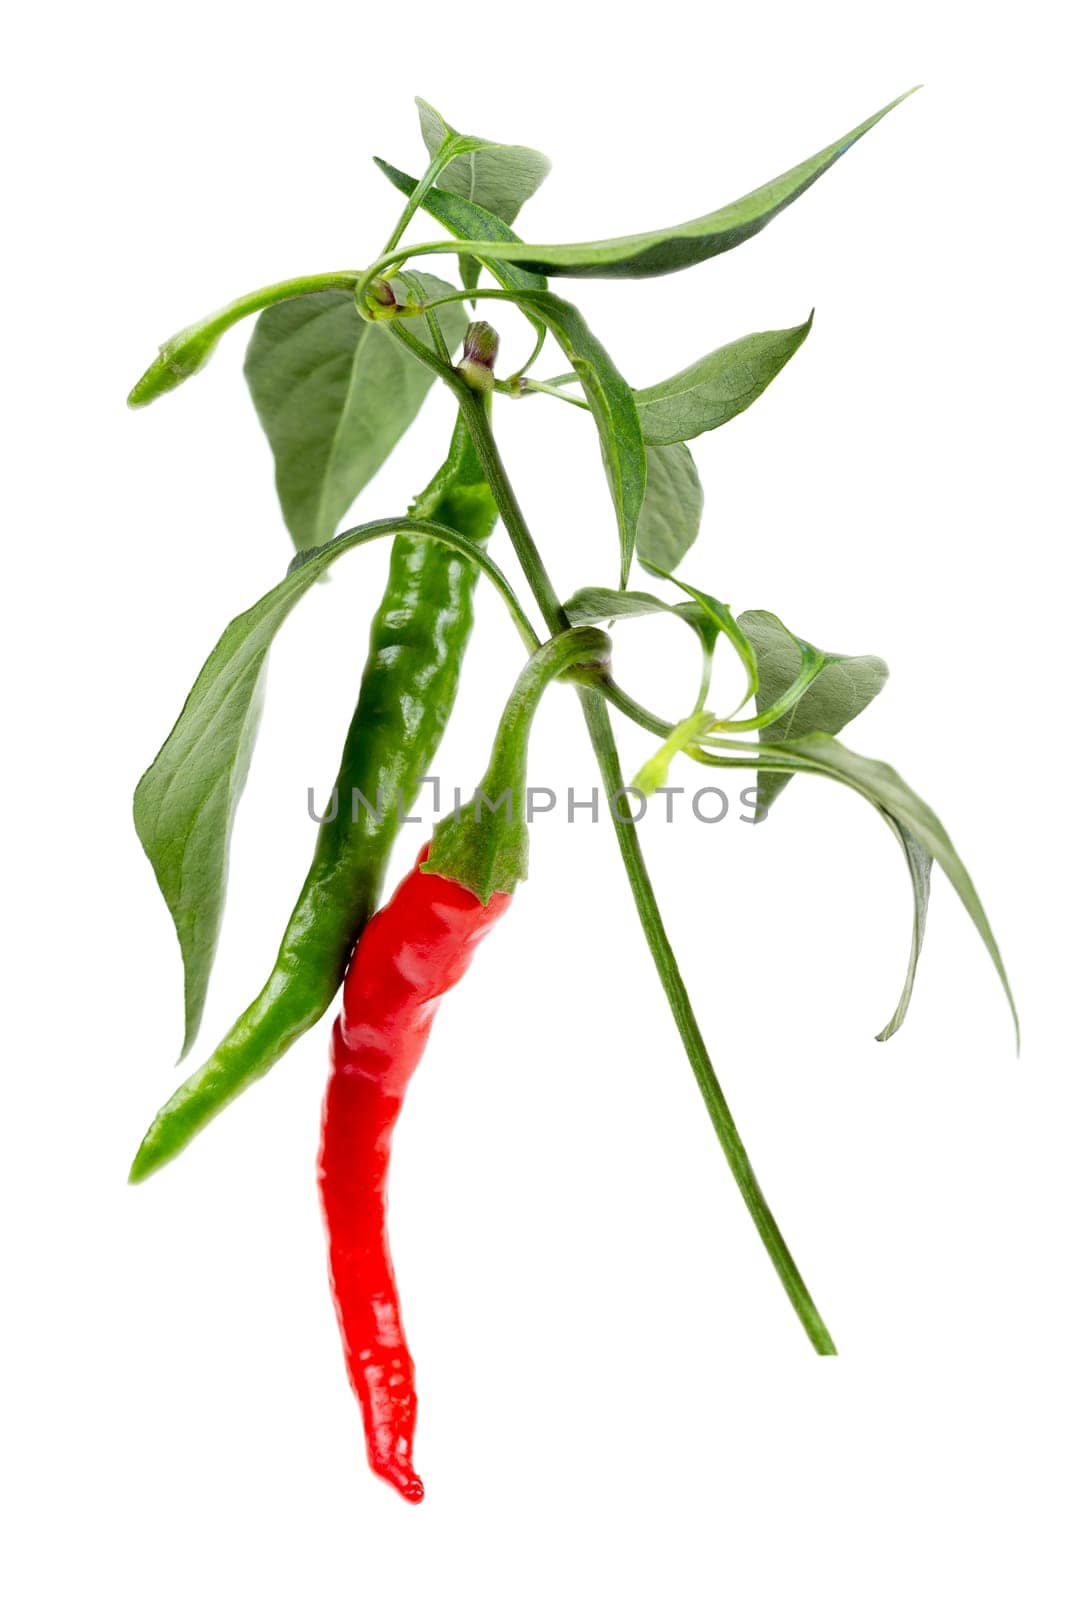 red and green chili or chilli cayenne pepper isolated on white background cutout by JPC-PROD